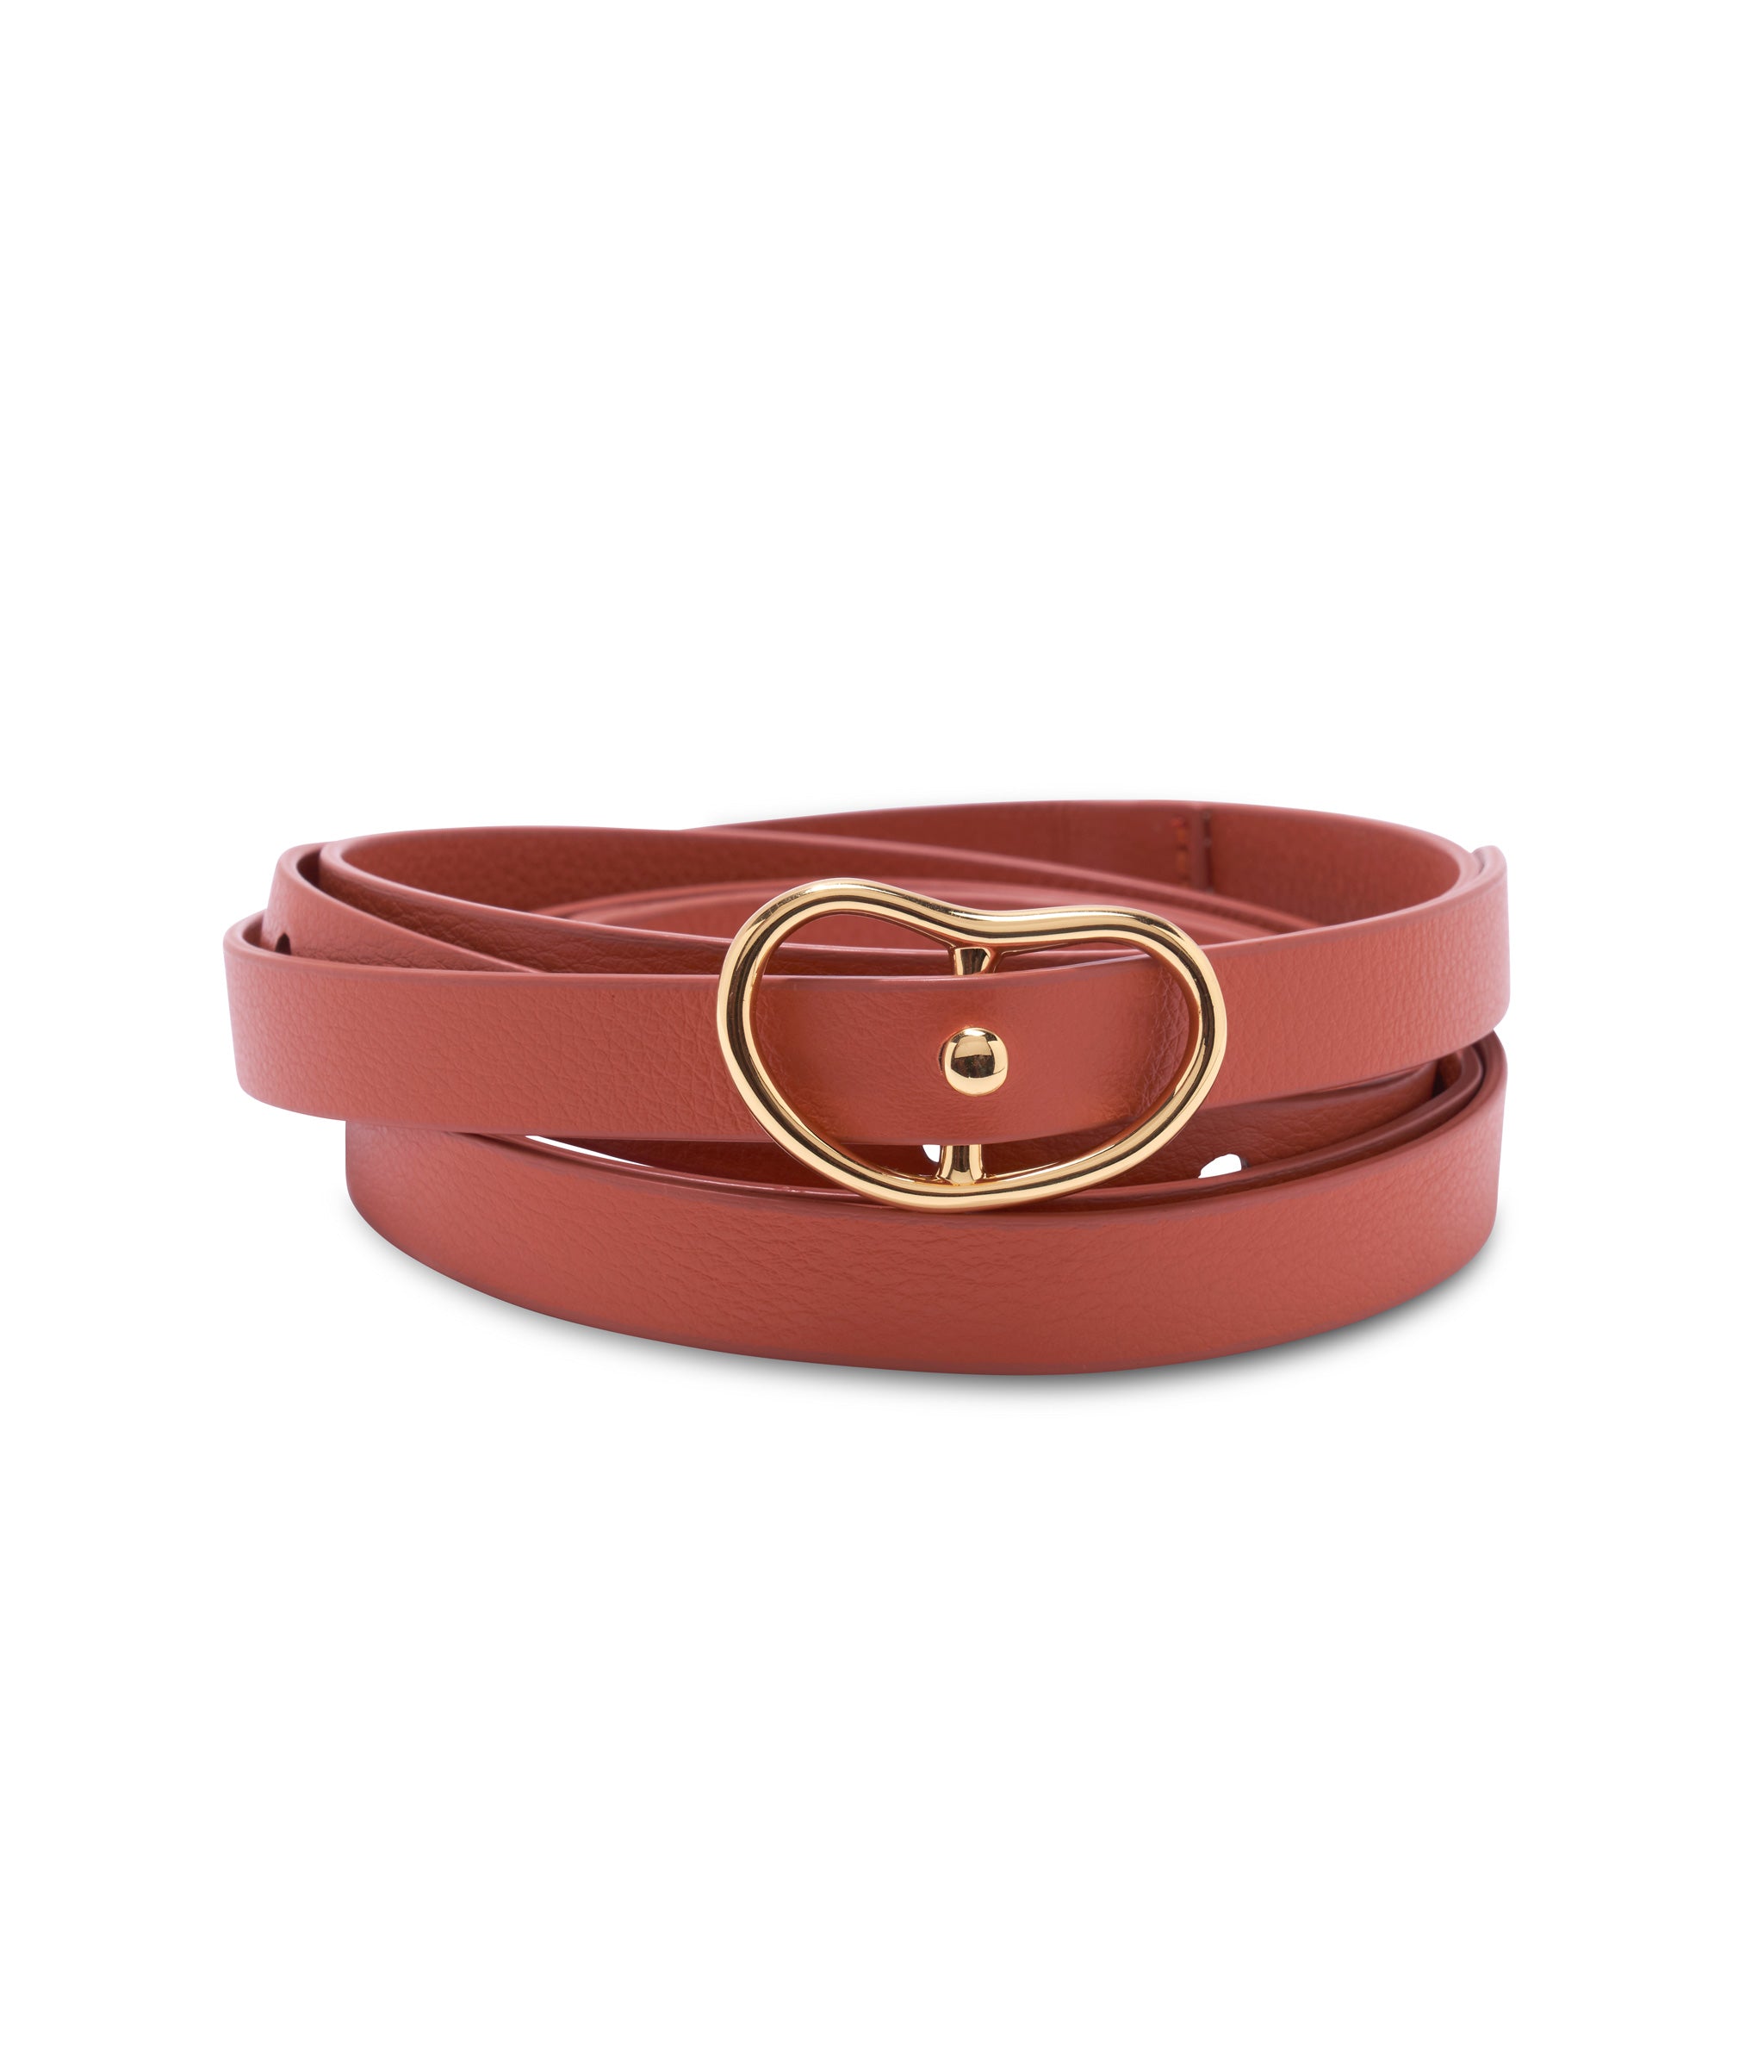 Double Wrap Georgia Belt In Papaya. Thin belt in orangey-red leather with adjustable double wrap and gold buckle. 